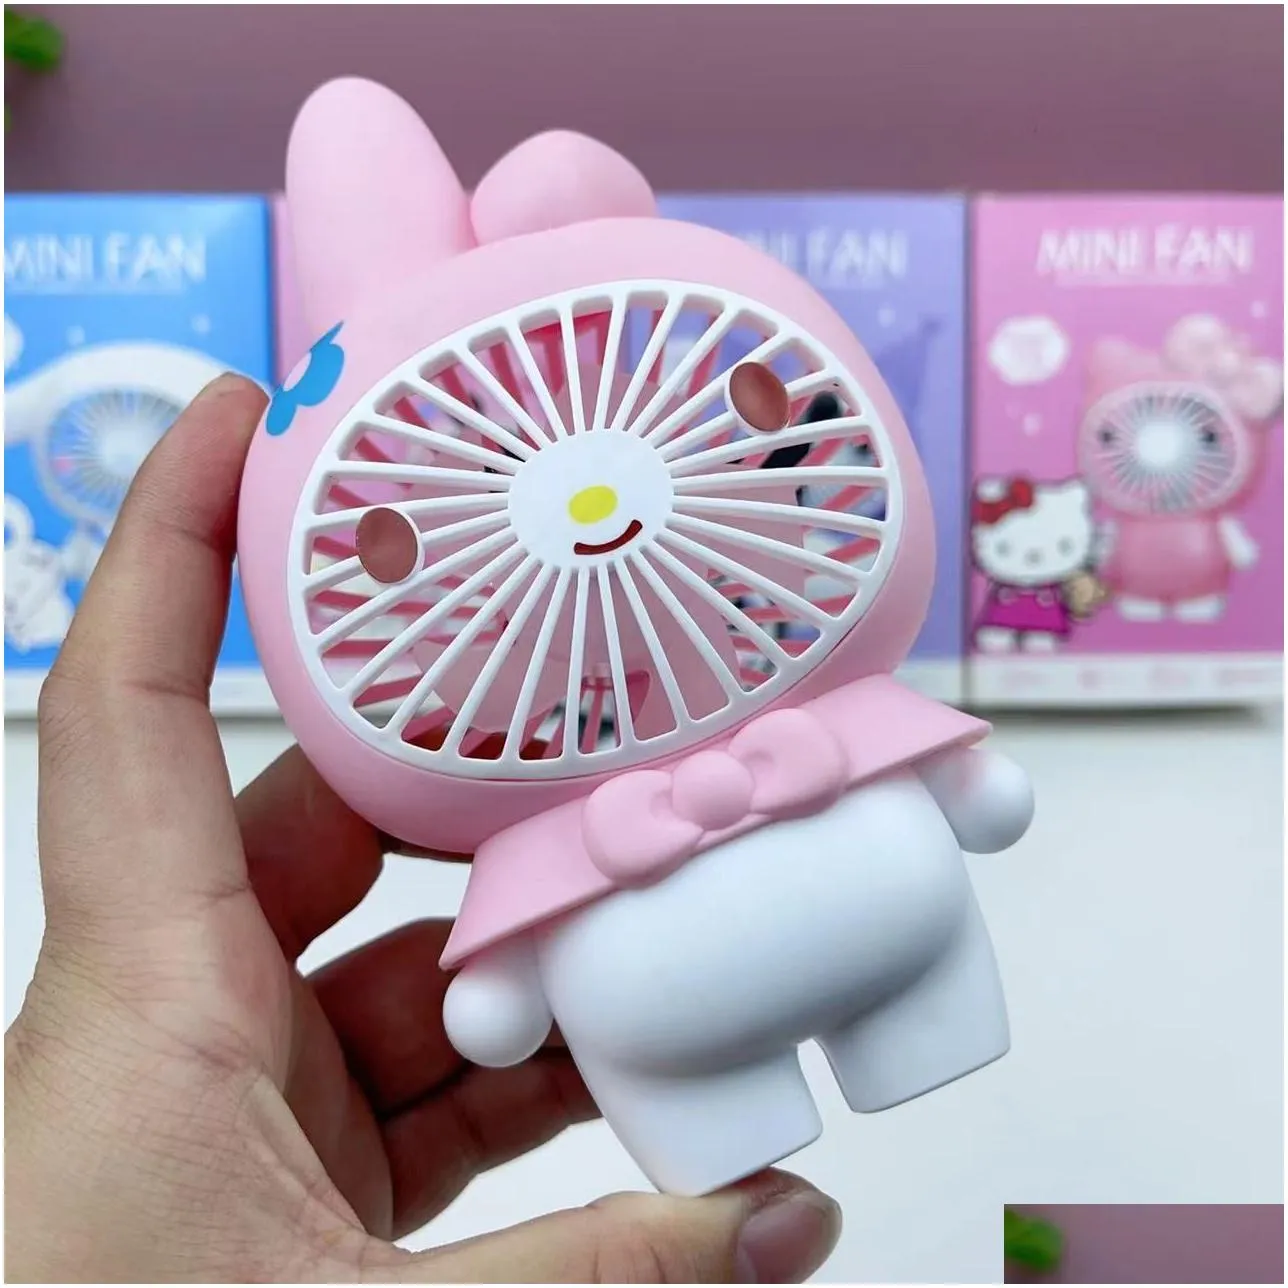 Fans Cartoon Fan Student Dormitory Electric Usb Small Rechargeable Desktop Portable Children Gift Drop Delivery Toys Gifts Electronic Otxtm